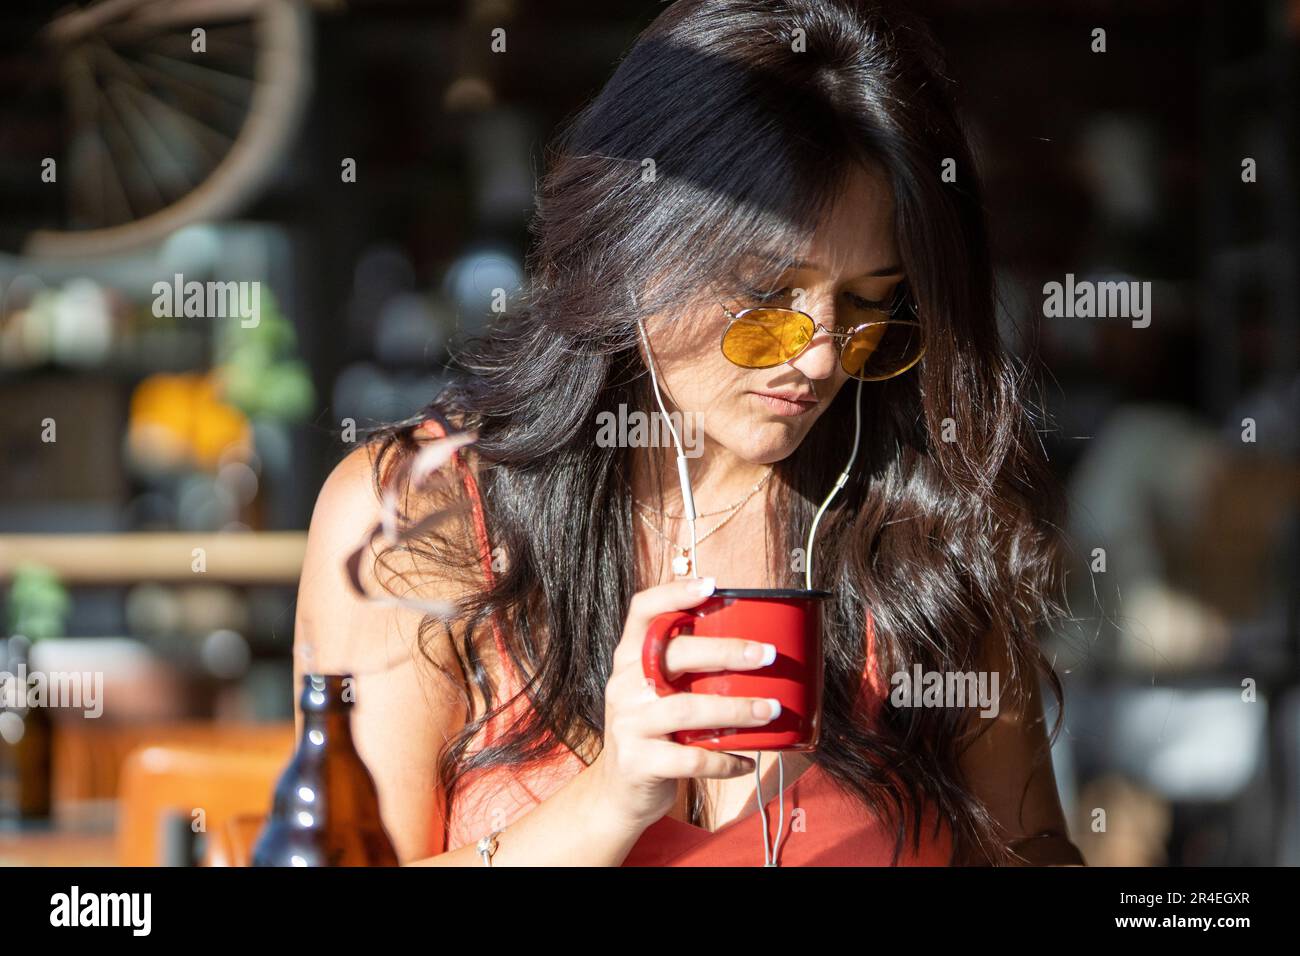 Close-up view of a woman holding a cup of coffee and listening to music with earphones at a coffee shop. Stock Photo